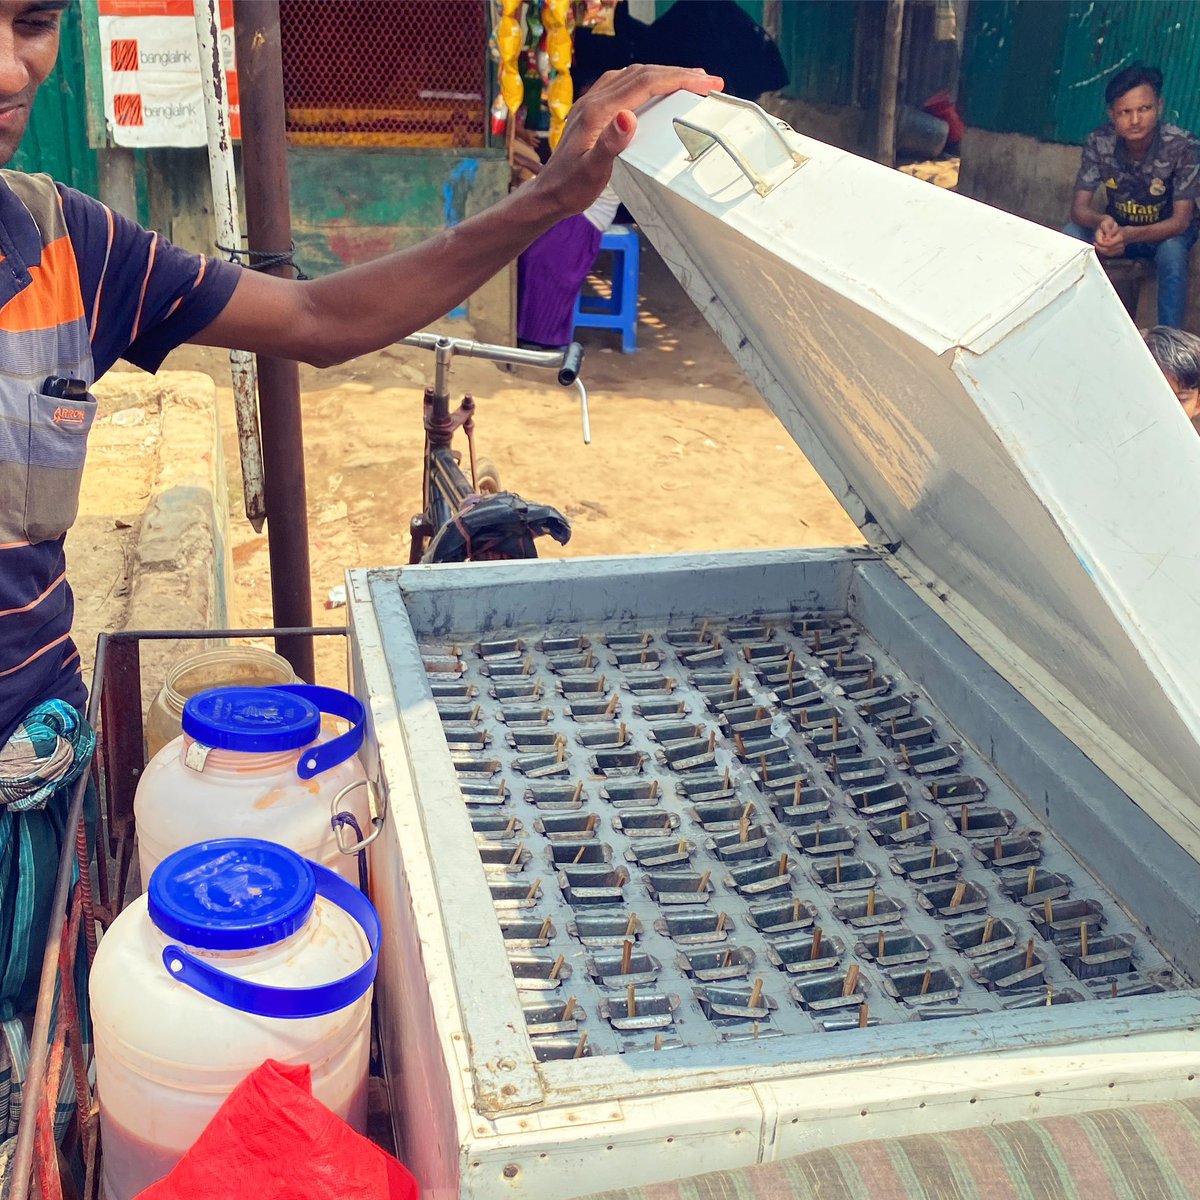 ❄️🧊Ice cream & legal service. Quite the business acumen by Rohingya refugees, when facing a heatwave! In Cox’s Bazar 🇧🇩